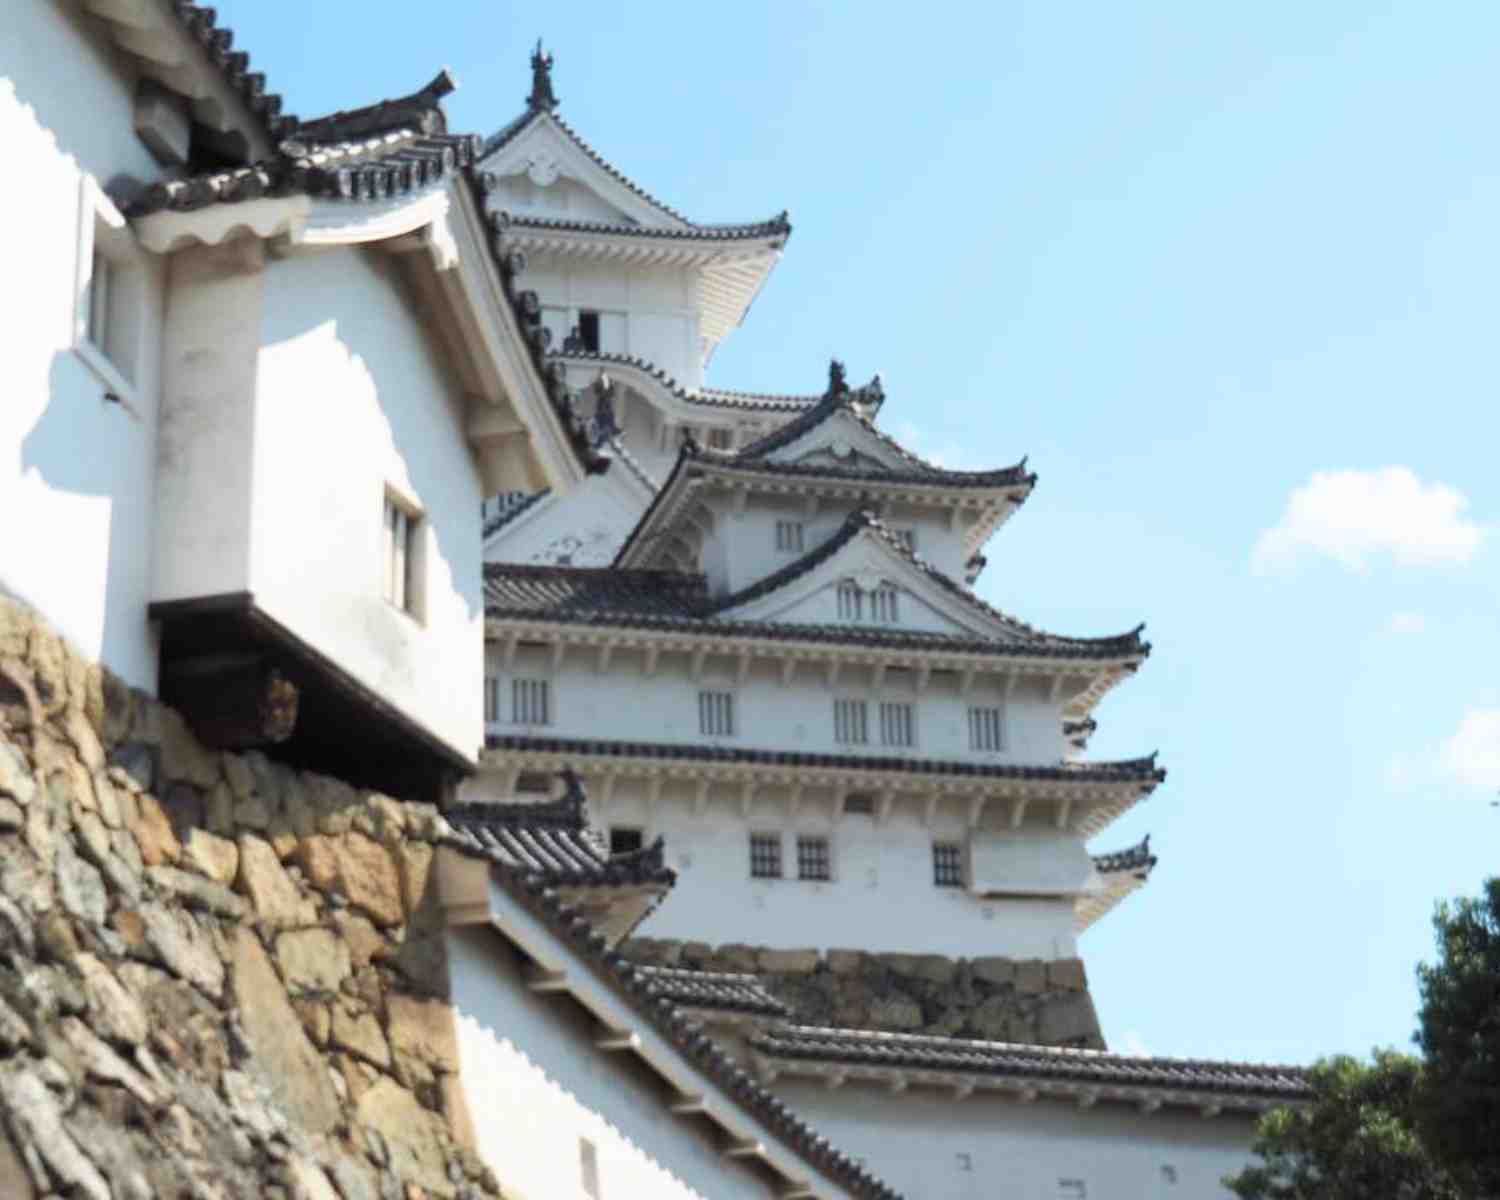 Himeji Castle is the place to explore with kids